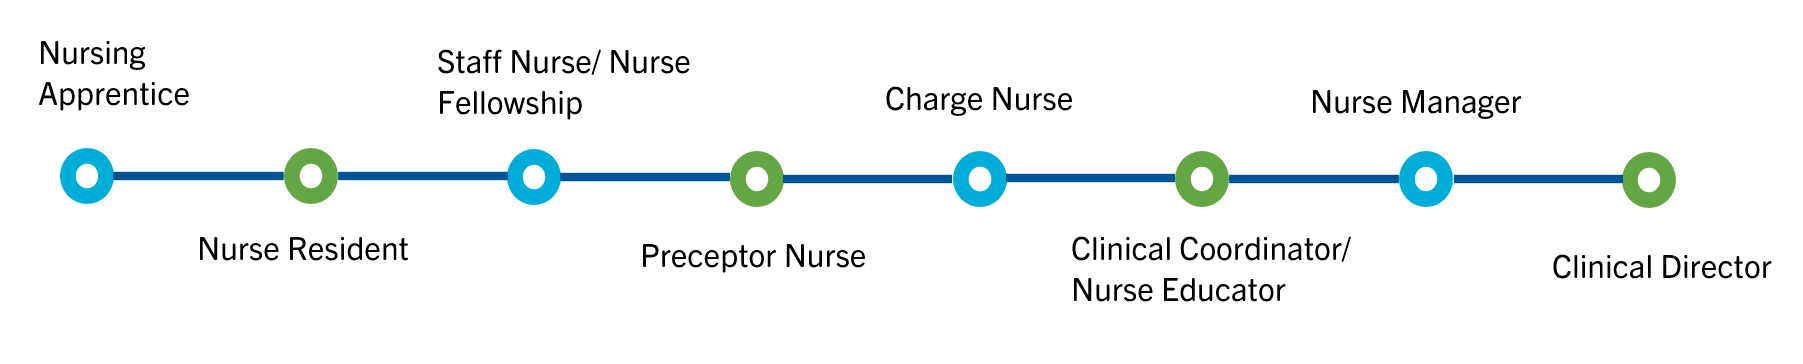 Career path shows a list of jobs that someone could get by getting promotions at this company: 1.Nursing Apprentice 2.Nurse Resident 3.Staff Nurse/ Nurse Fellowship 4.Preceptor Nurse 5.Charge Nurse 6.Clinical Coordinator/Nurse Educator 7.Nurse Manager 8.Clinical Director